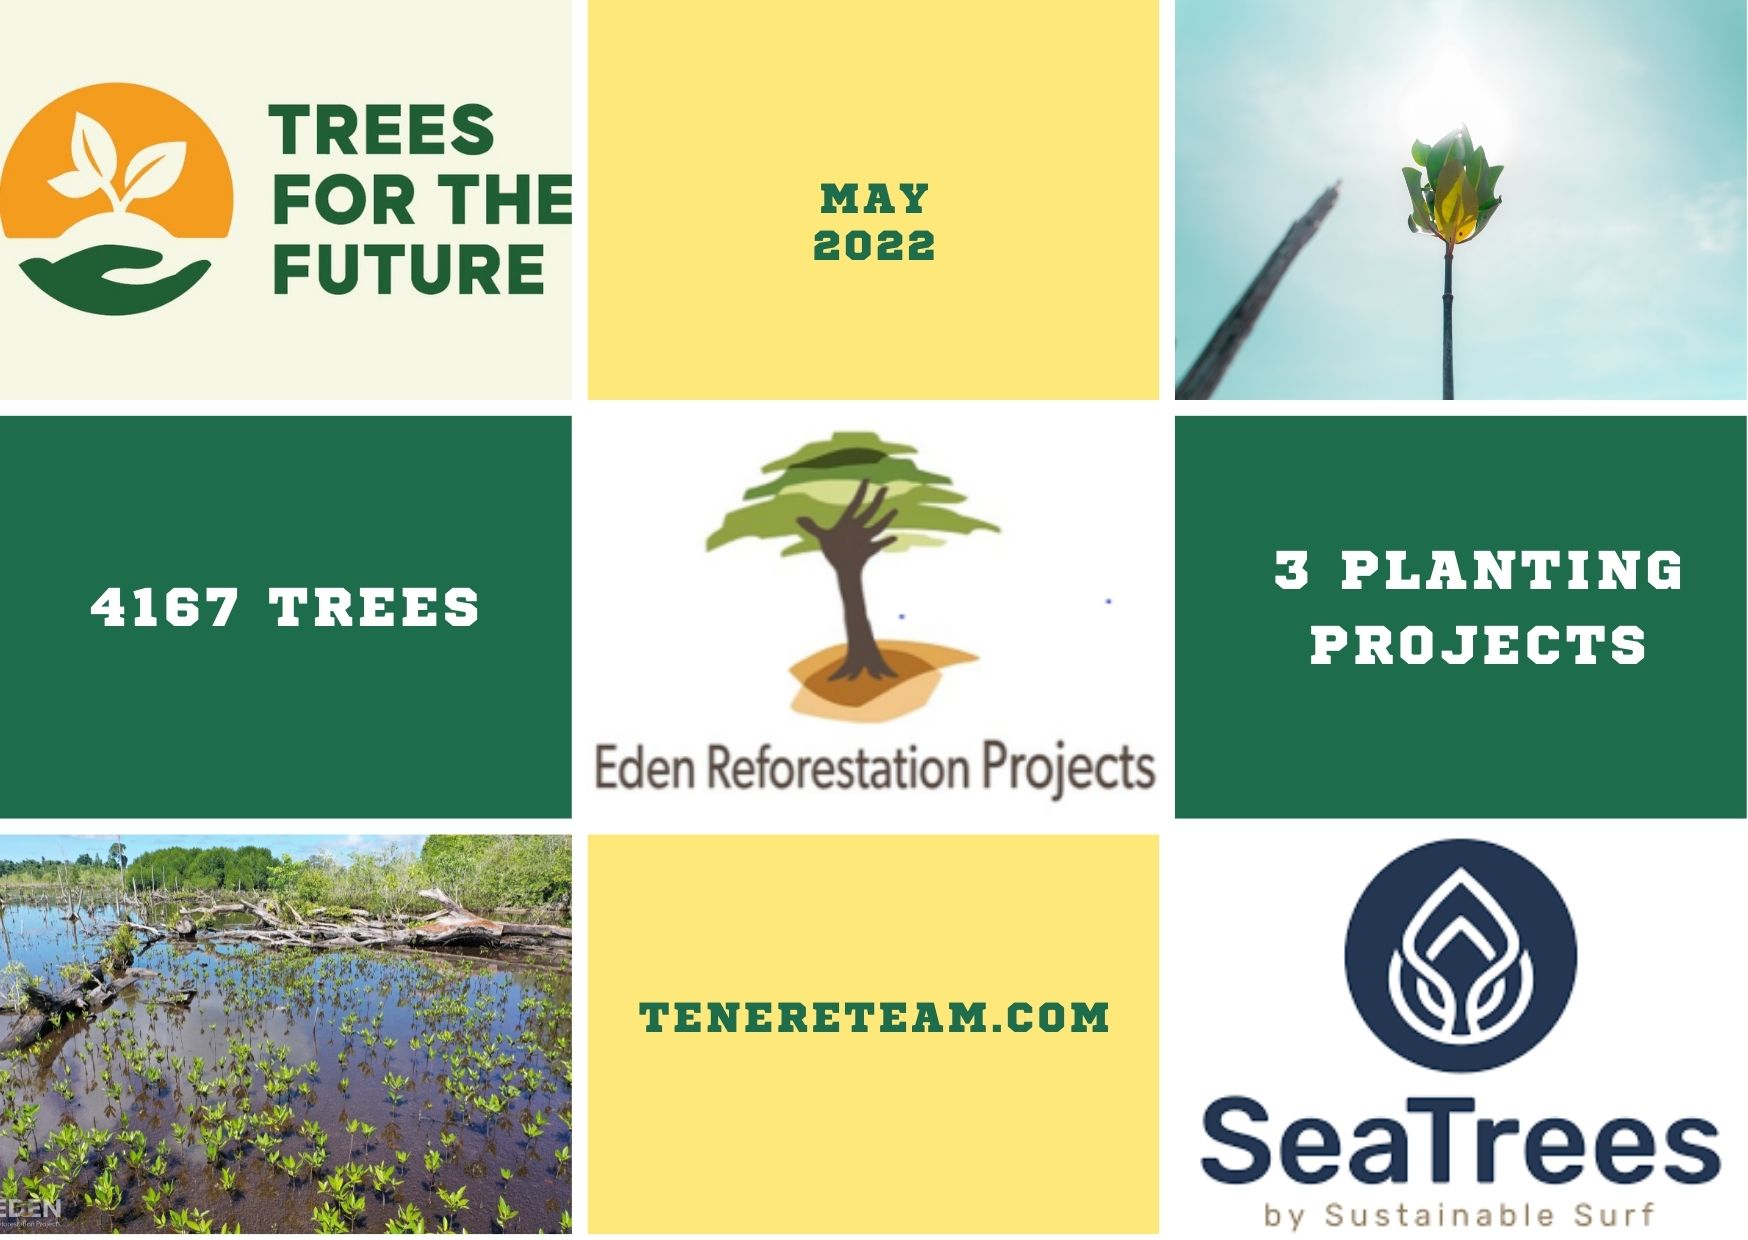 Tree Donation Update: 4,167 Trees & Interview with Eden Reforestation Projects